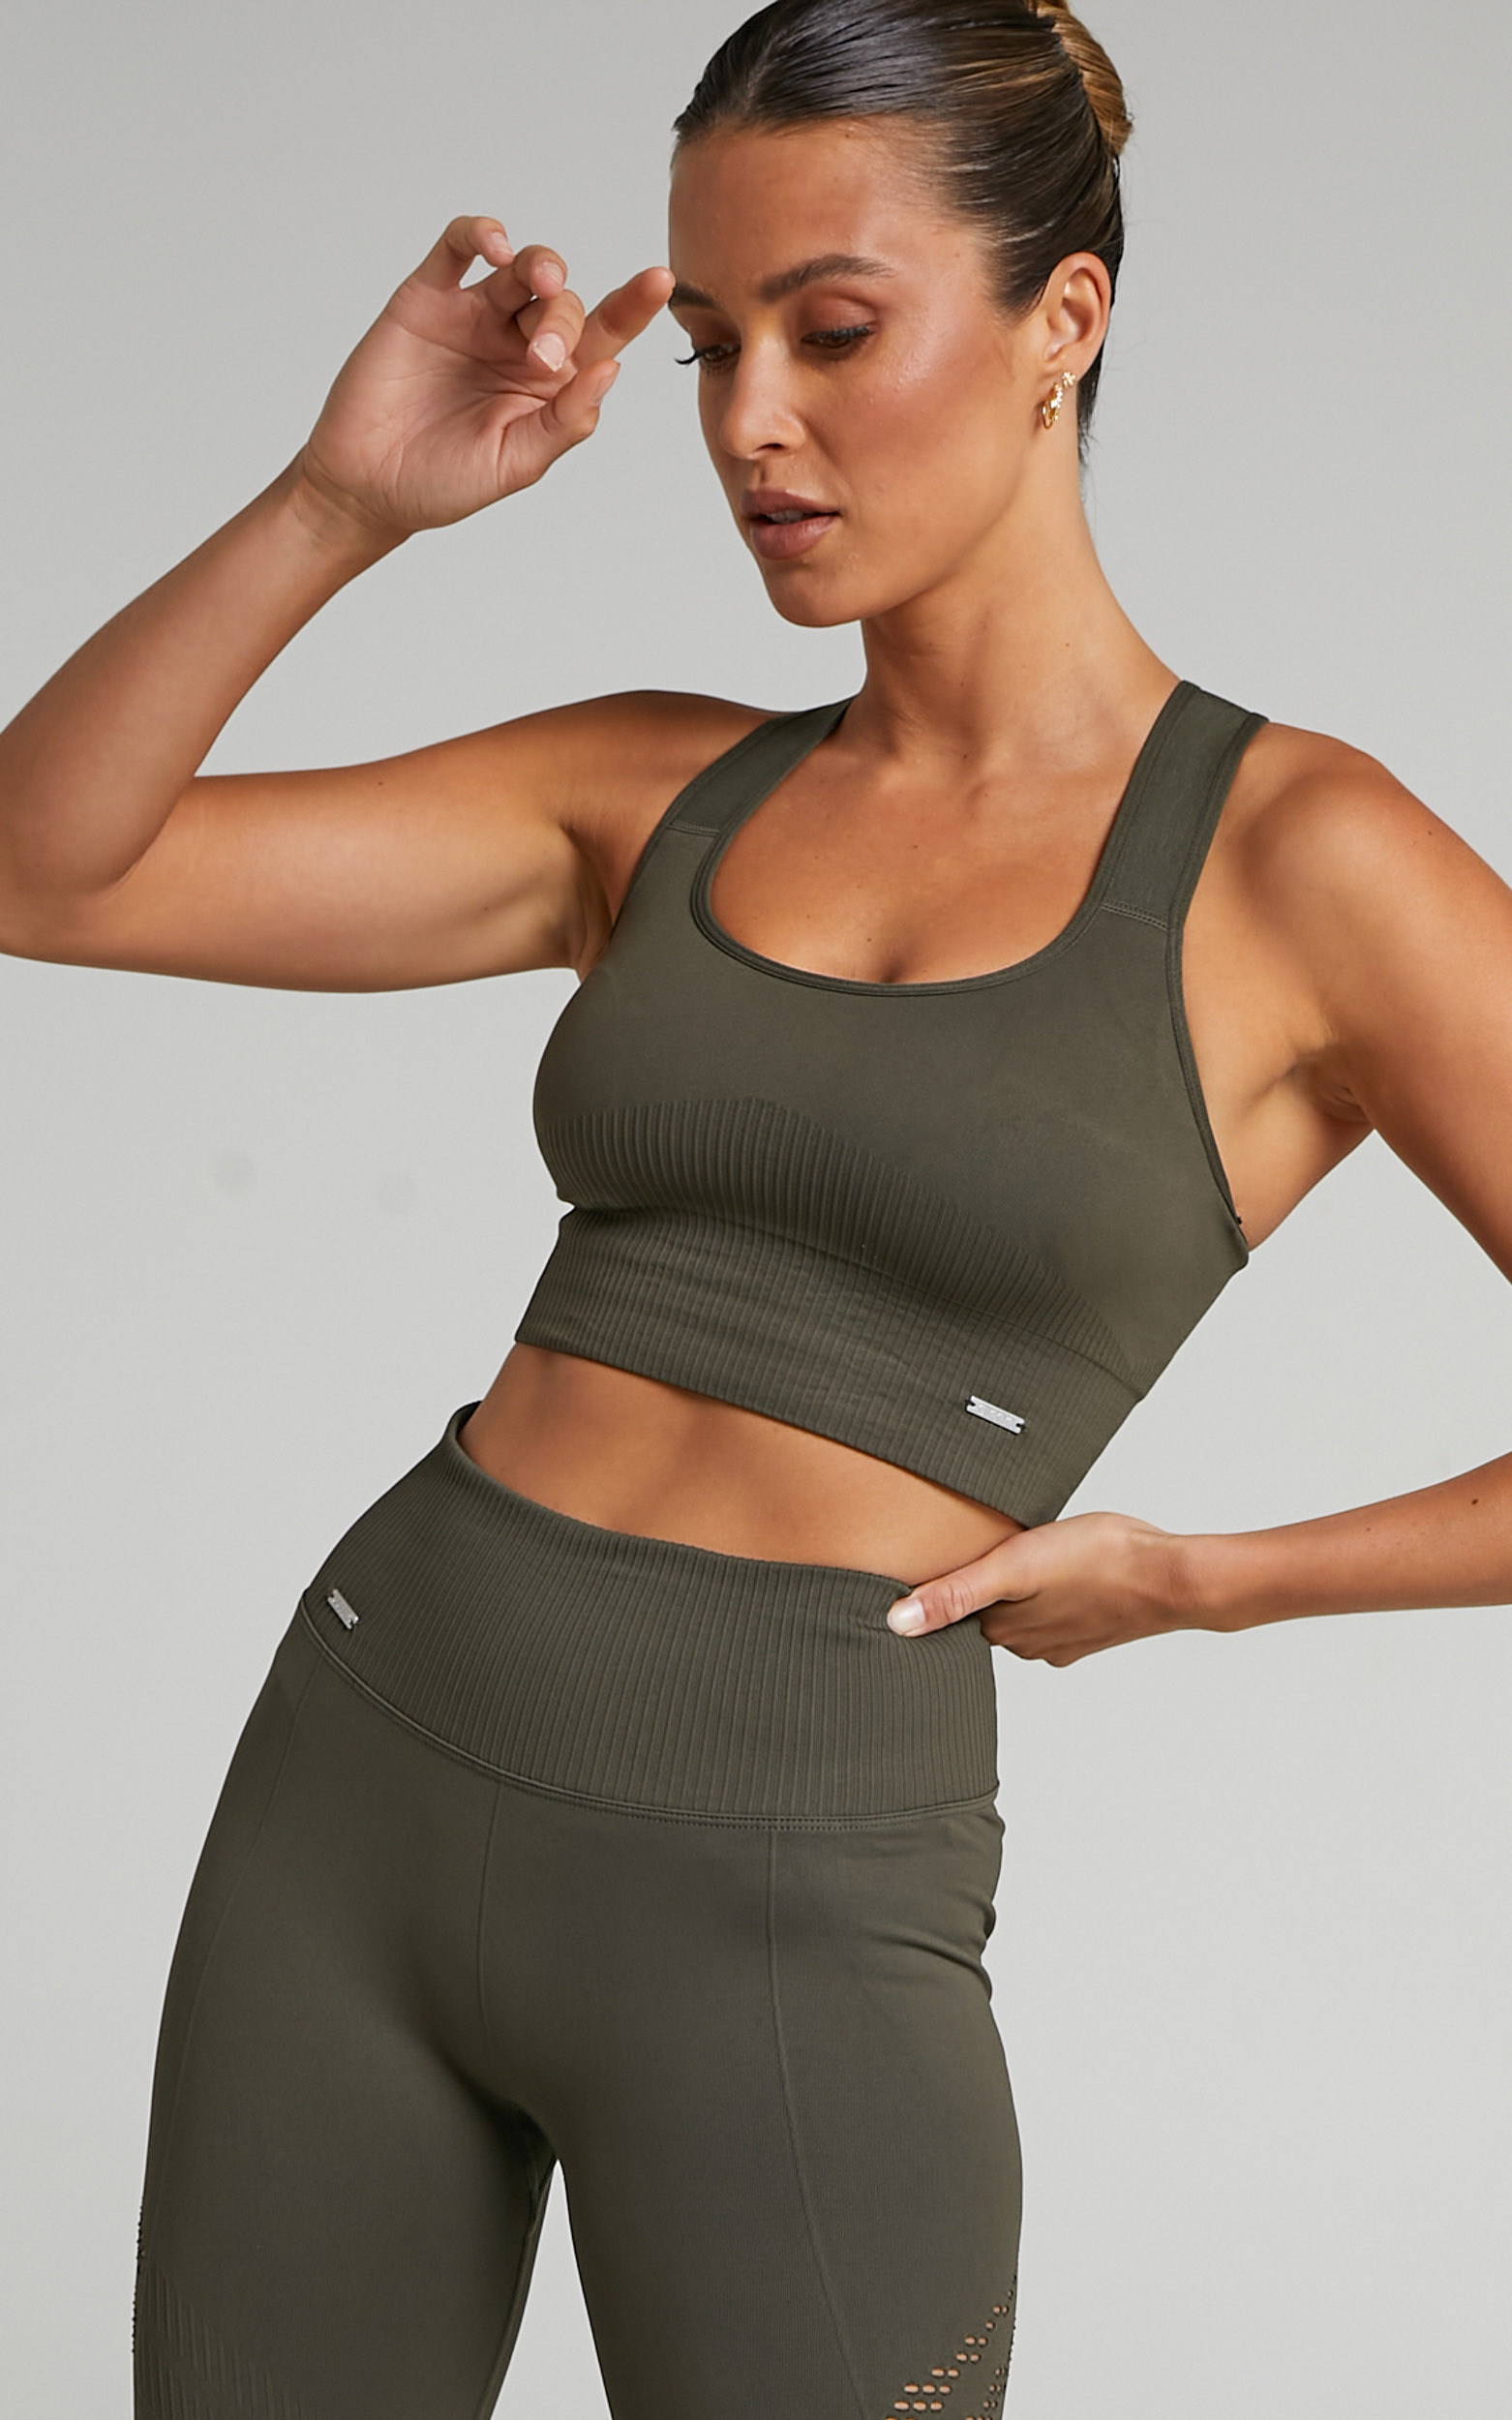 Aim'n - HIGH SUPPORT RIBBED BRA in Khaki - XS, GRN1, hi-res image number null